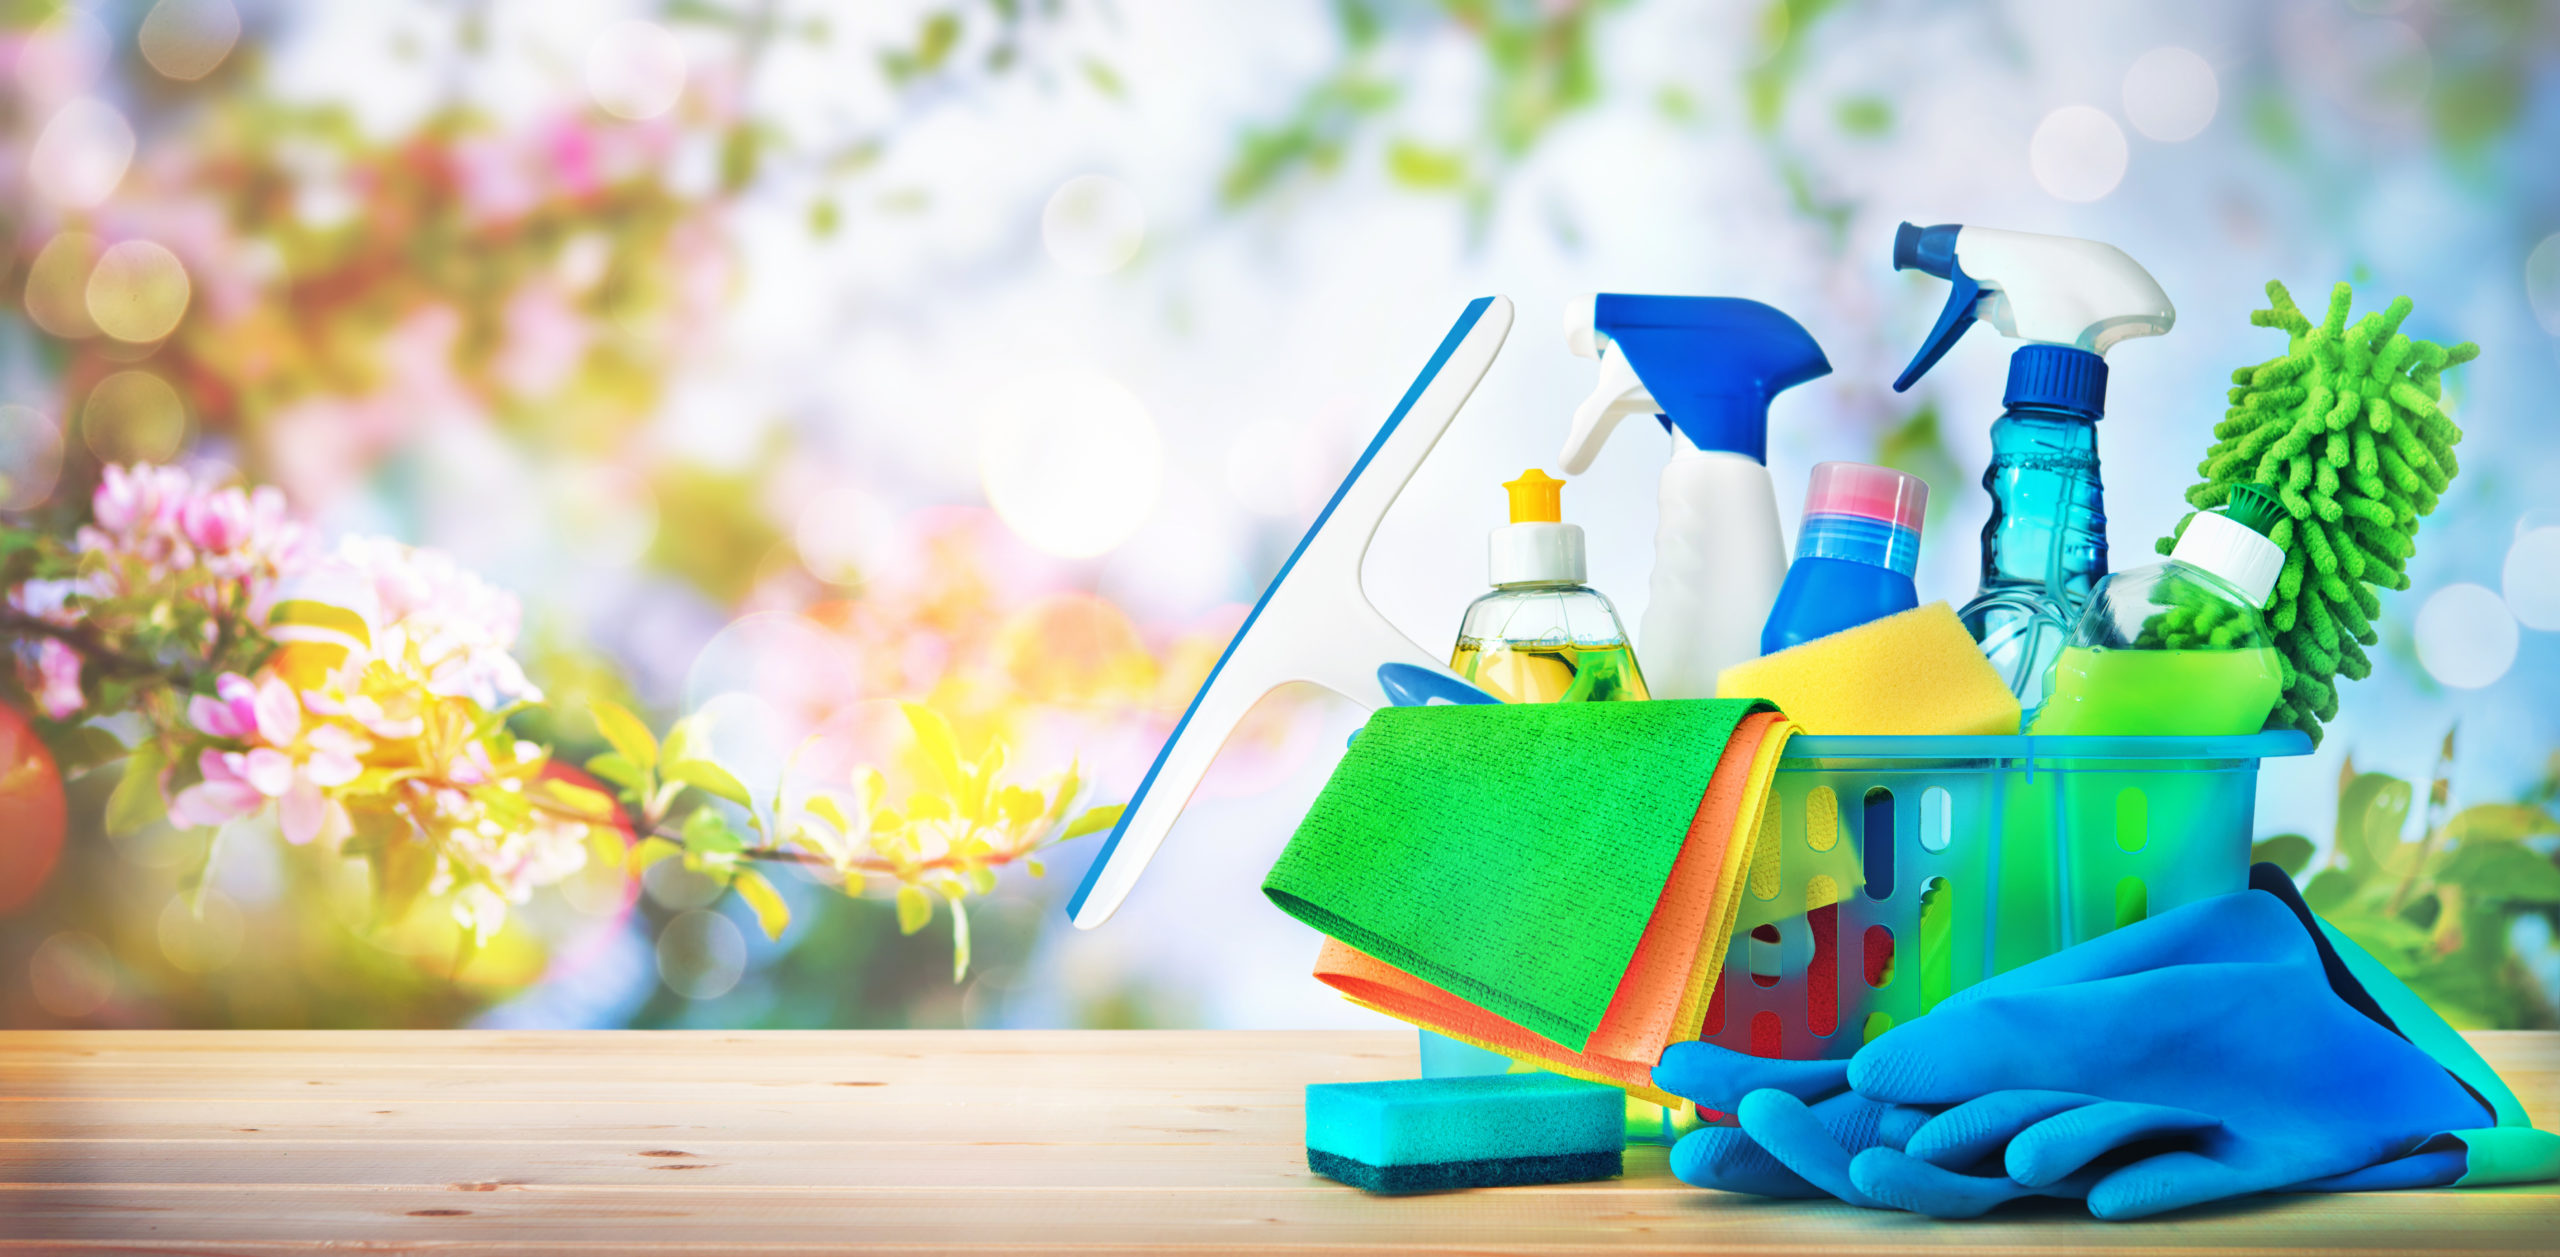 Cleaning Products Against Spring Background